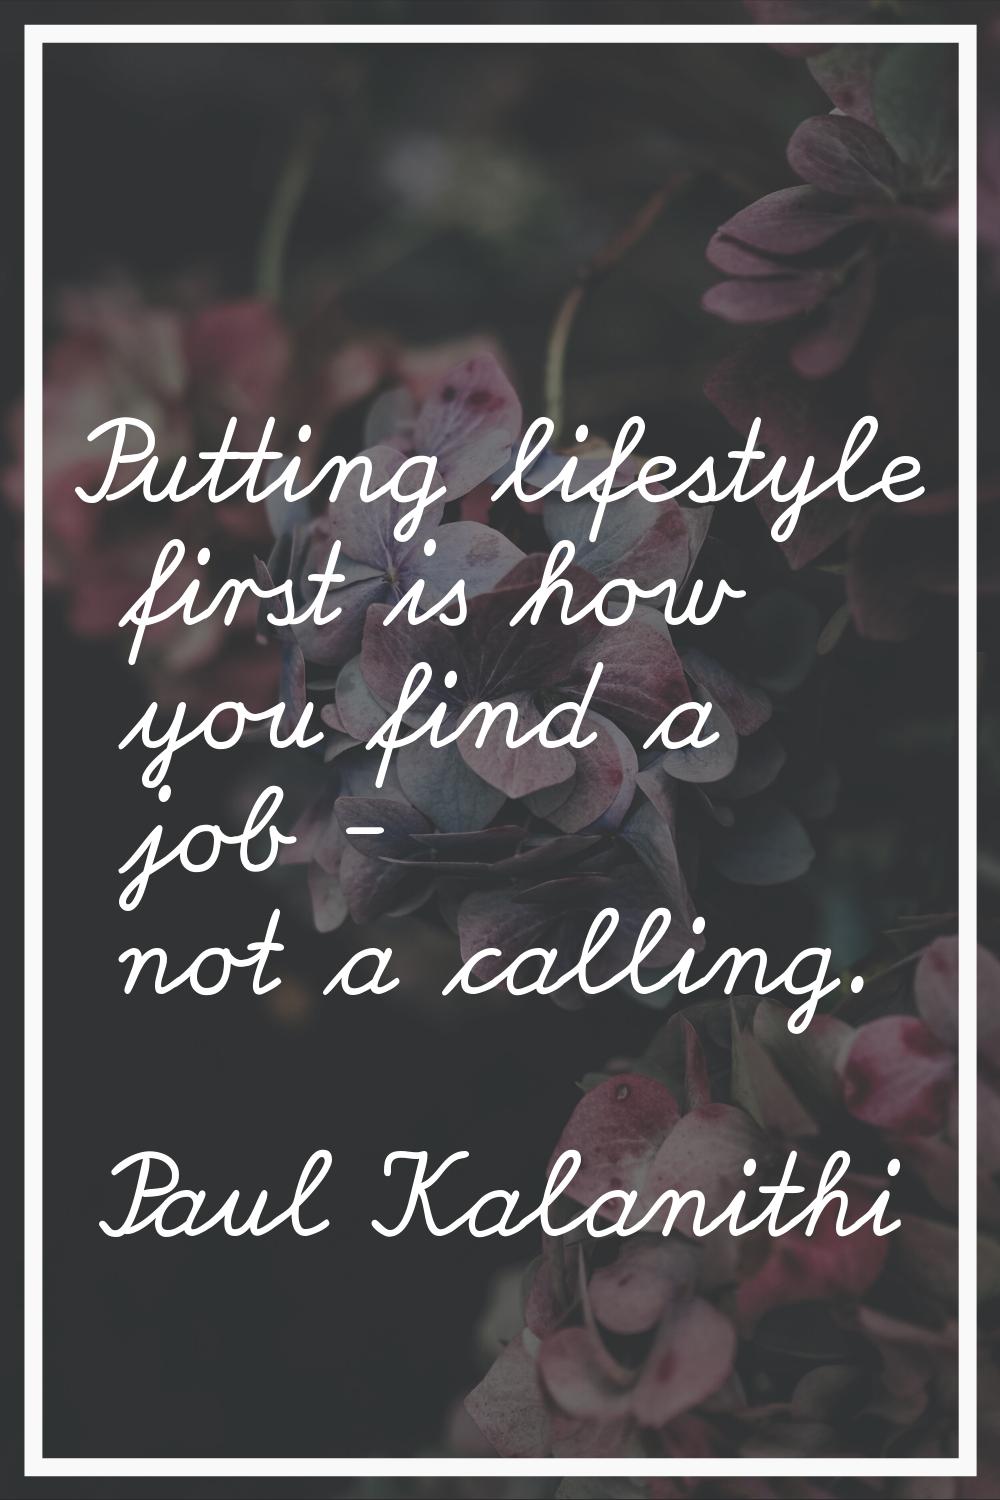 Putting lifestyle first is how you find a job - not a calling.